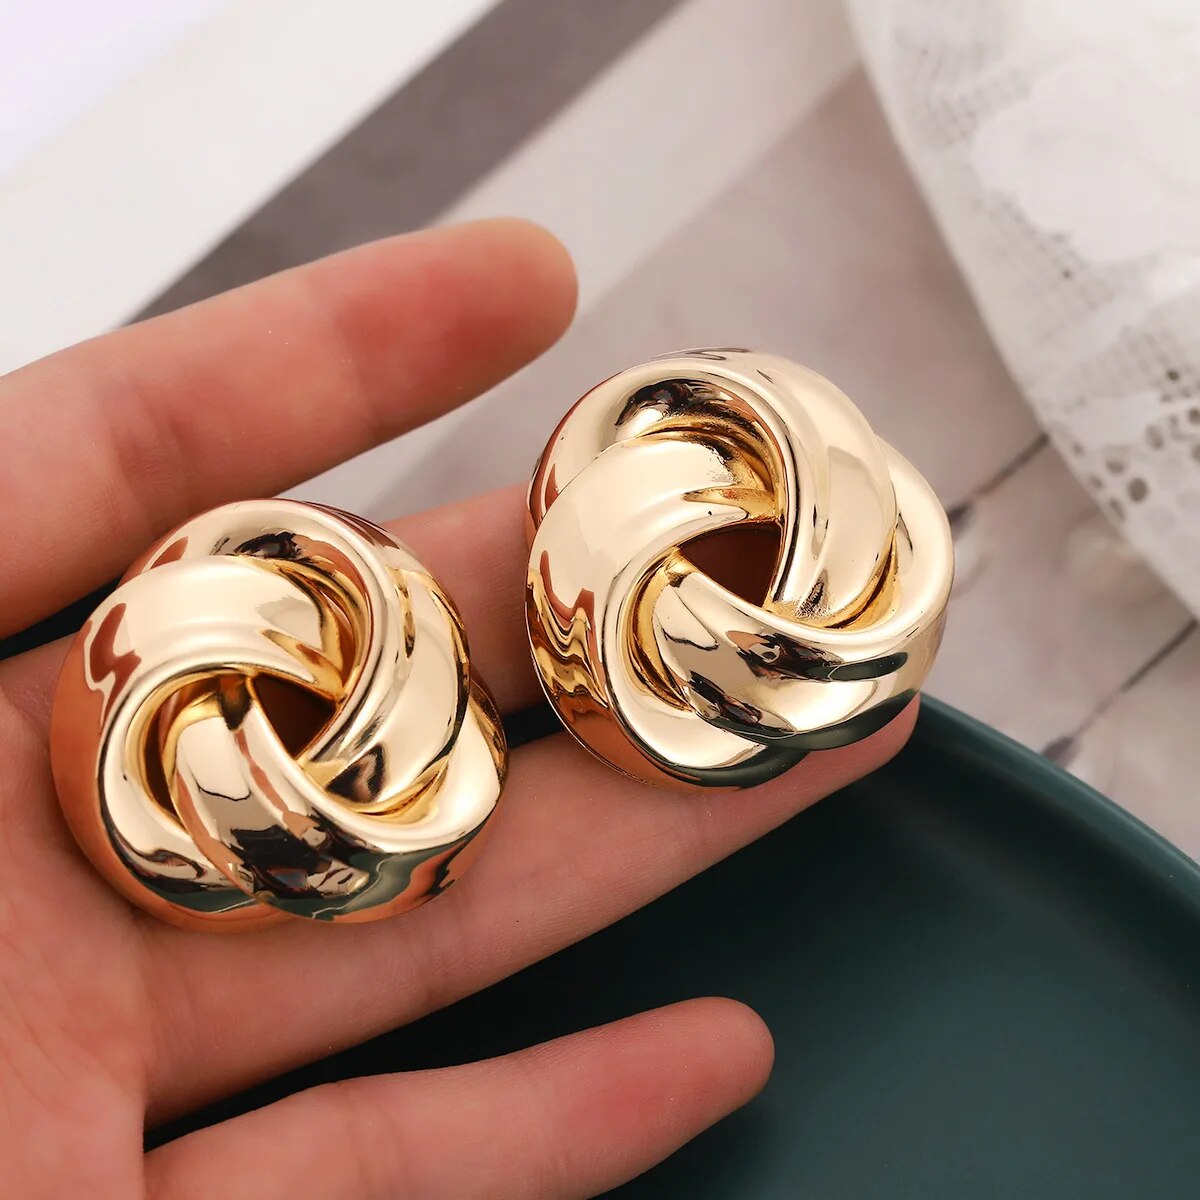 Elegance Unleashed: Savoring Style with Croissant-inspired Stud Earrings